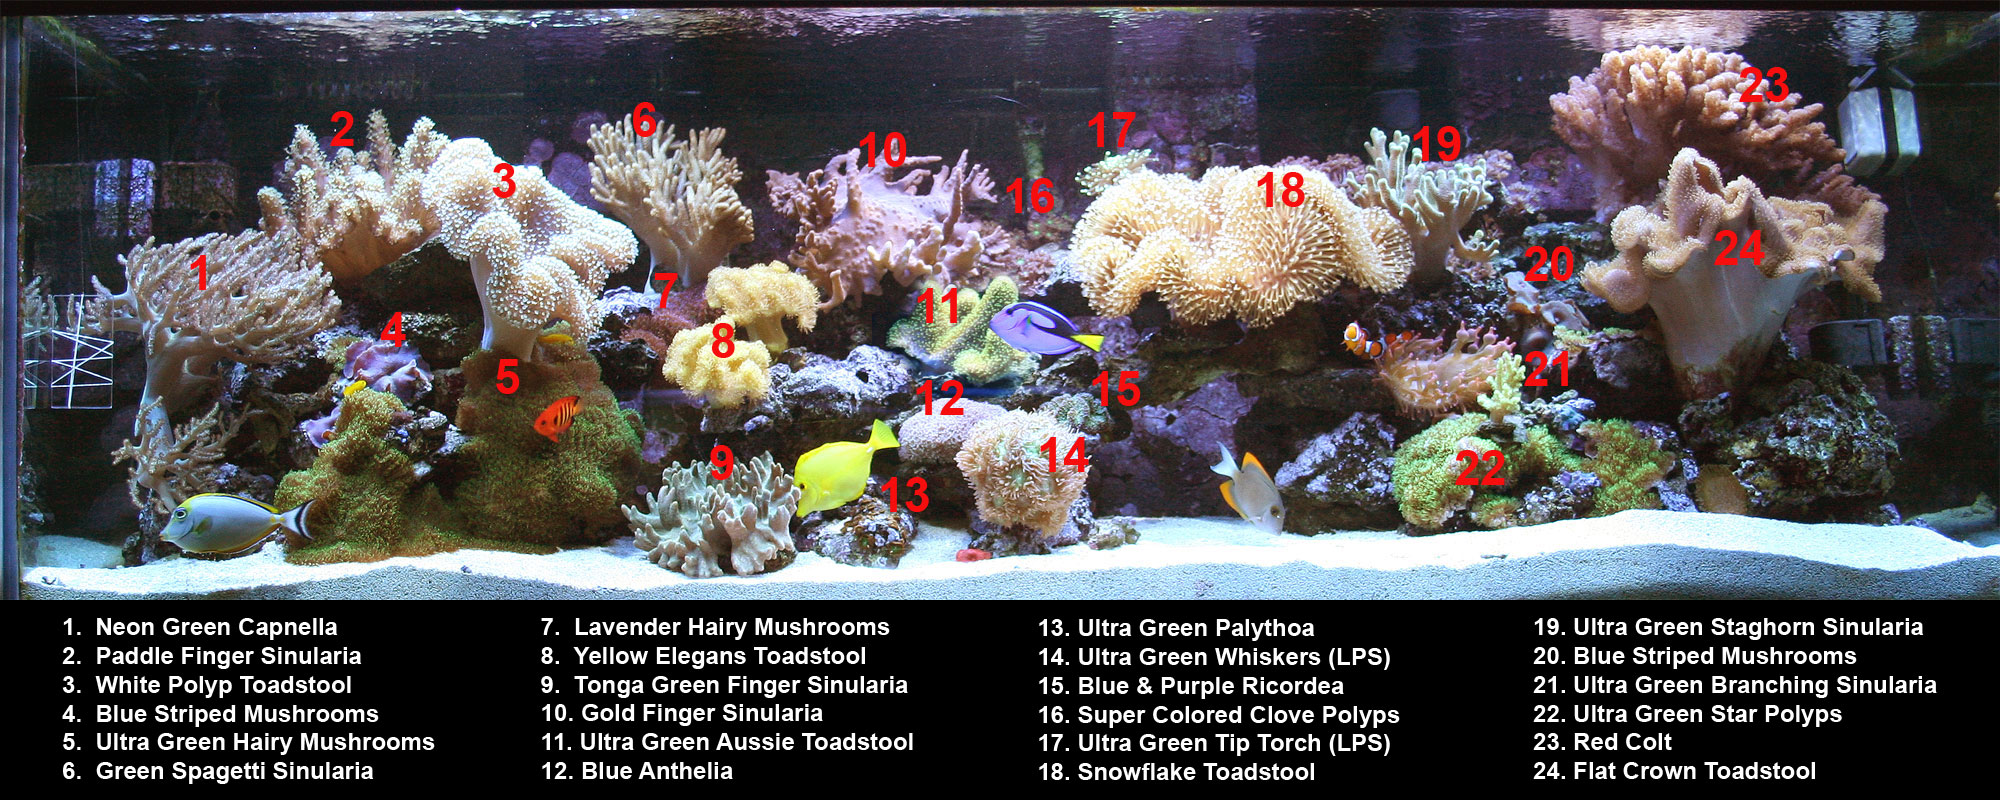 Coral Identification Chart